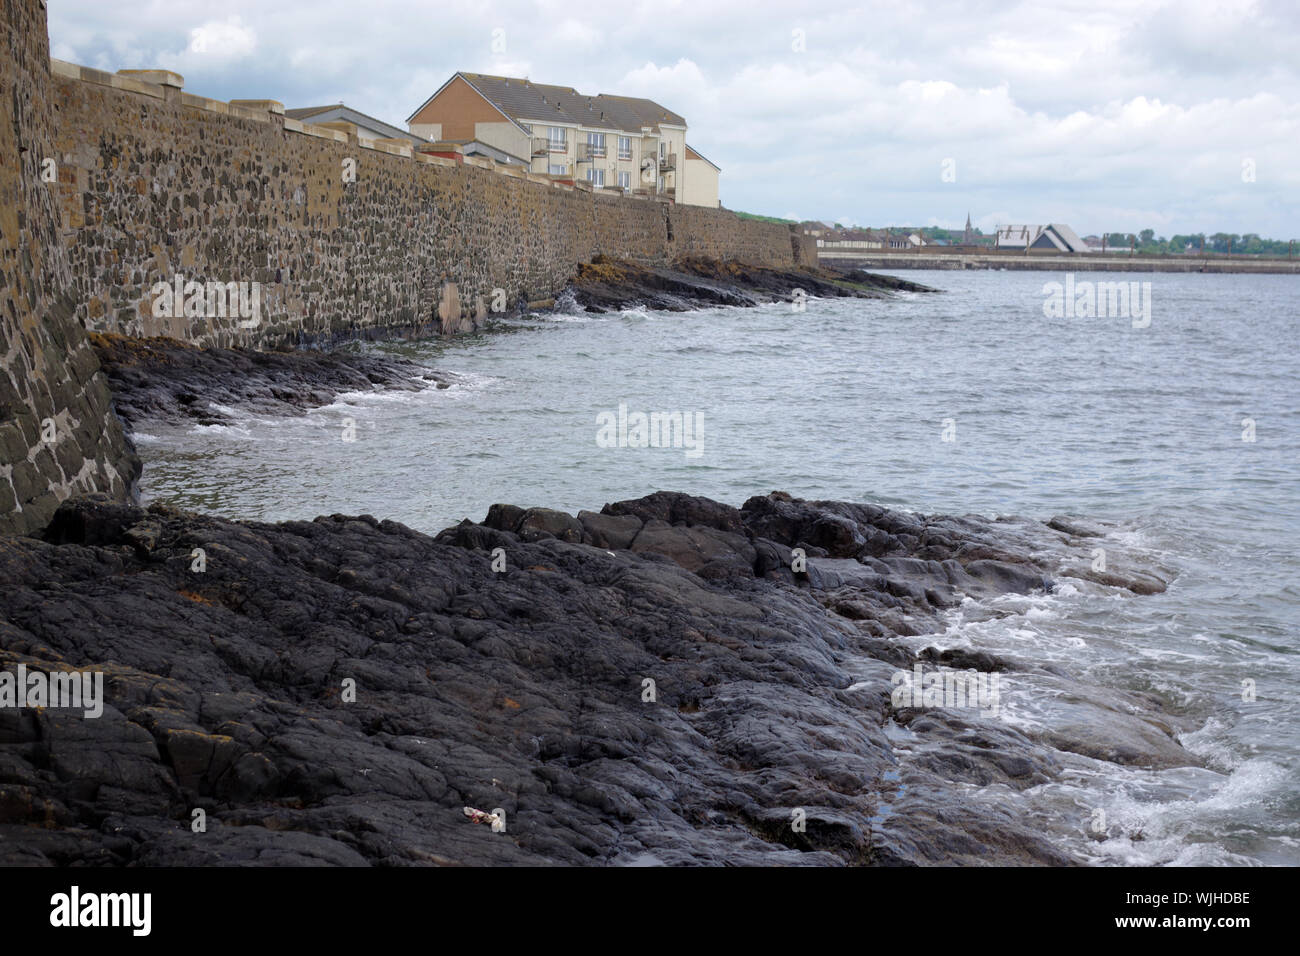 The tide is in on the rocks at Saltcoats. Saltcoats is a small town on the west coast of North Ayrshire, Scotland. Stock Photo